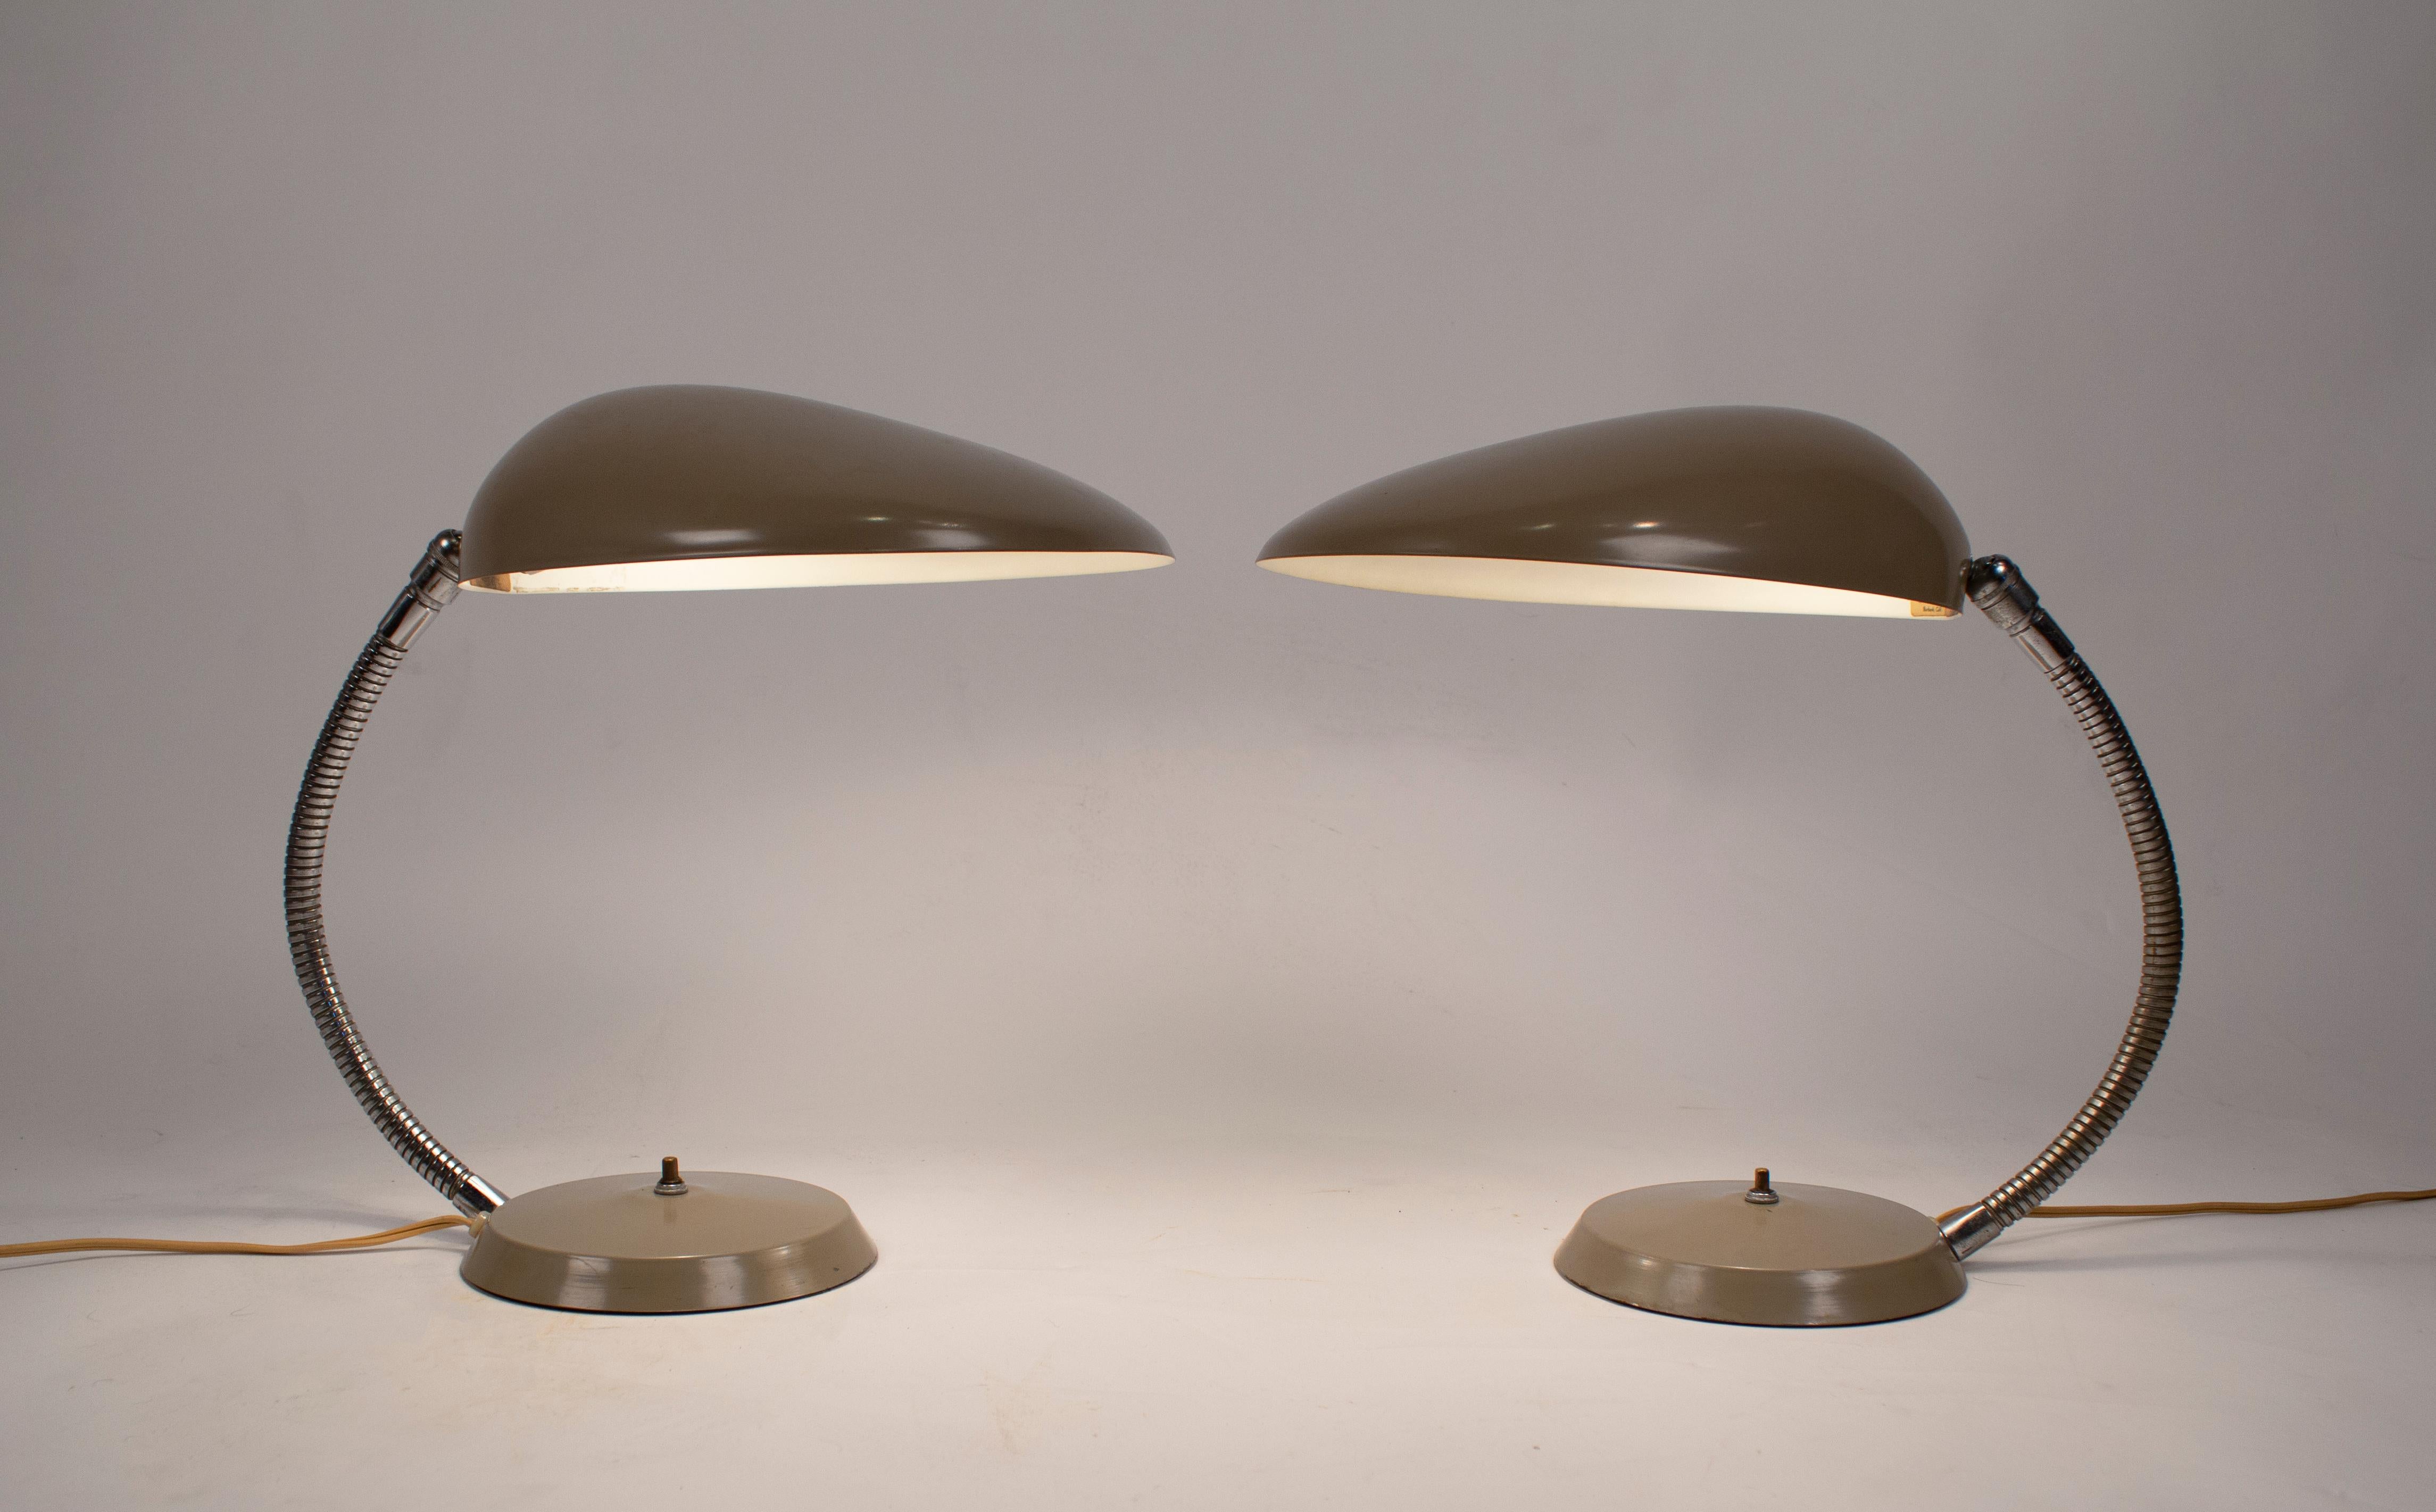 Museum Quality Pair of Greta M Grossman Cobra Lamps Ralph O. Smith Labels Intact

A collector's Grade pair of Greta M Grossman cobra table lamps with labels intact. In 1950 Grossman won the 'Good Design Award' for her cobra lamp and it was